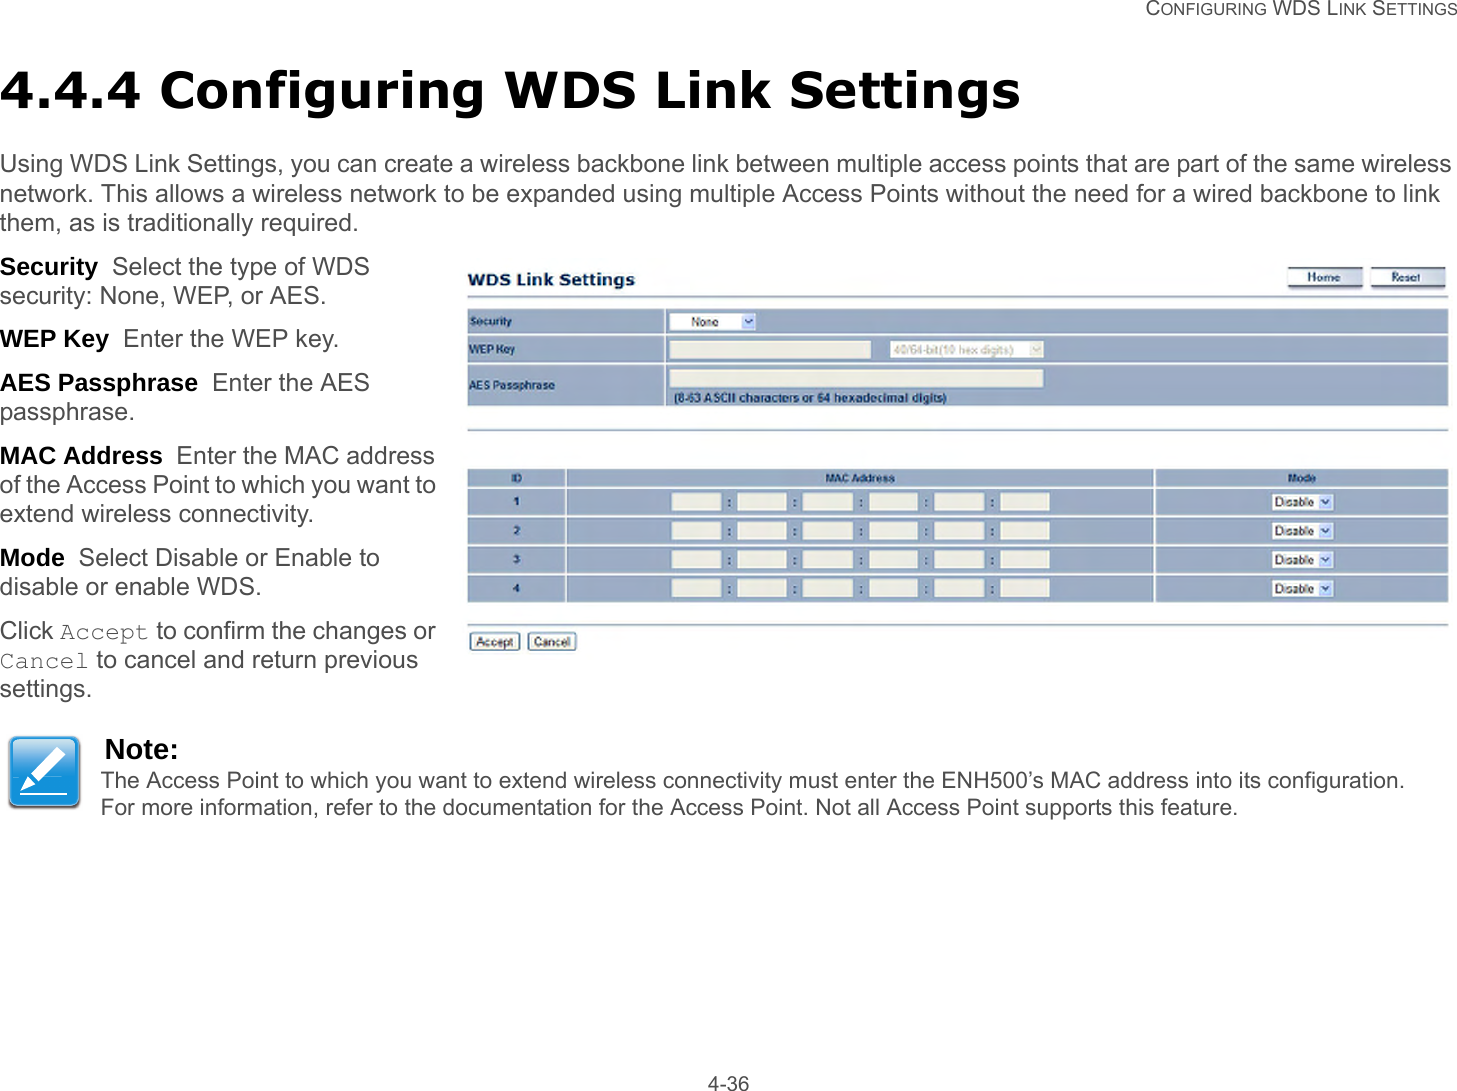   CONFIGURING WDS LINK SETTINGS 4-364.4.4 Configuring WDS Link SettingsUsing WDS Link Settings, you can create a wireless backbone link between multiple access points that are part of the same wireless network. This allows a wireless network to be expanded using multiple Access Points without the need for a wired backbone to link them, as is traditionally required.Security  Select the type of WDS security: None, WEP, or AES.WEP Key  Enter the WEP key.AES Passphrase  Enter the AES passphrase.MAC Address  Enter the MAC address of the Access Point to which you want to extend wireless connectivity.Mode  Select Disable or Enable to disable or enable WDS.Click Accept to confirm the changes or Cancel to cancel and return previous settings.Note:The Access Point to which you want to extend wireless connectivity must enter the ENH500’s MAC address into its configuration. For more information, refer to the documentation for the Access Point. Not all Access Point supports this feature.